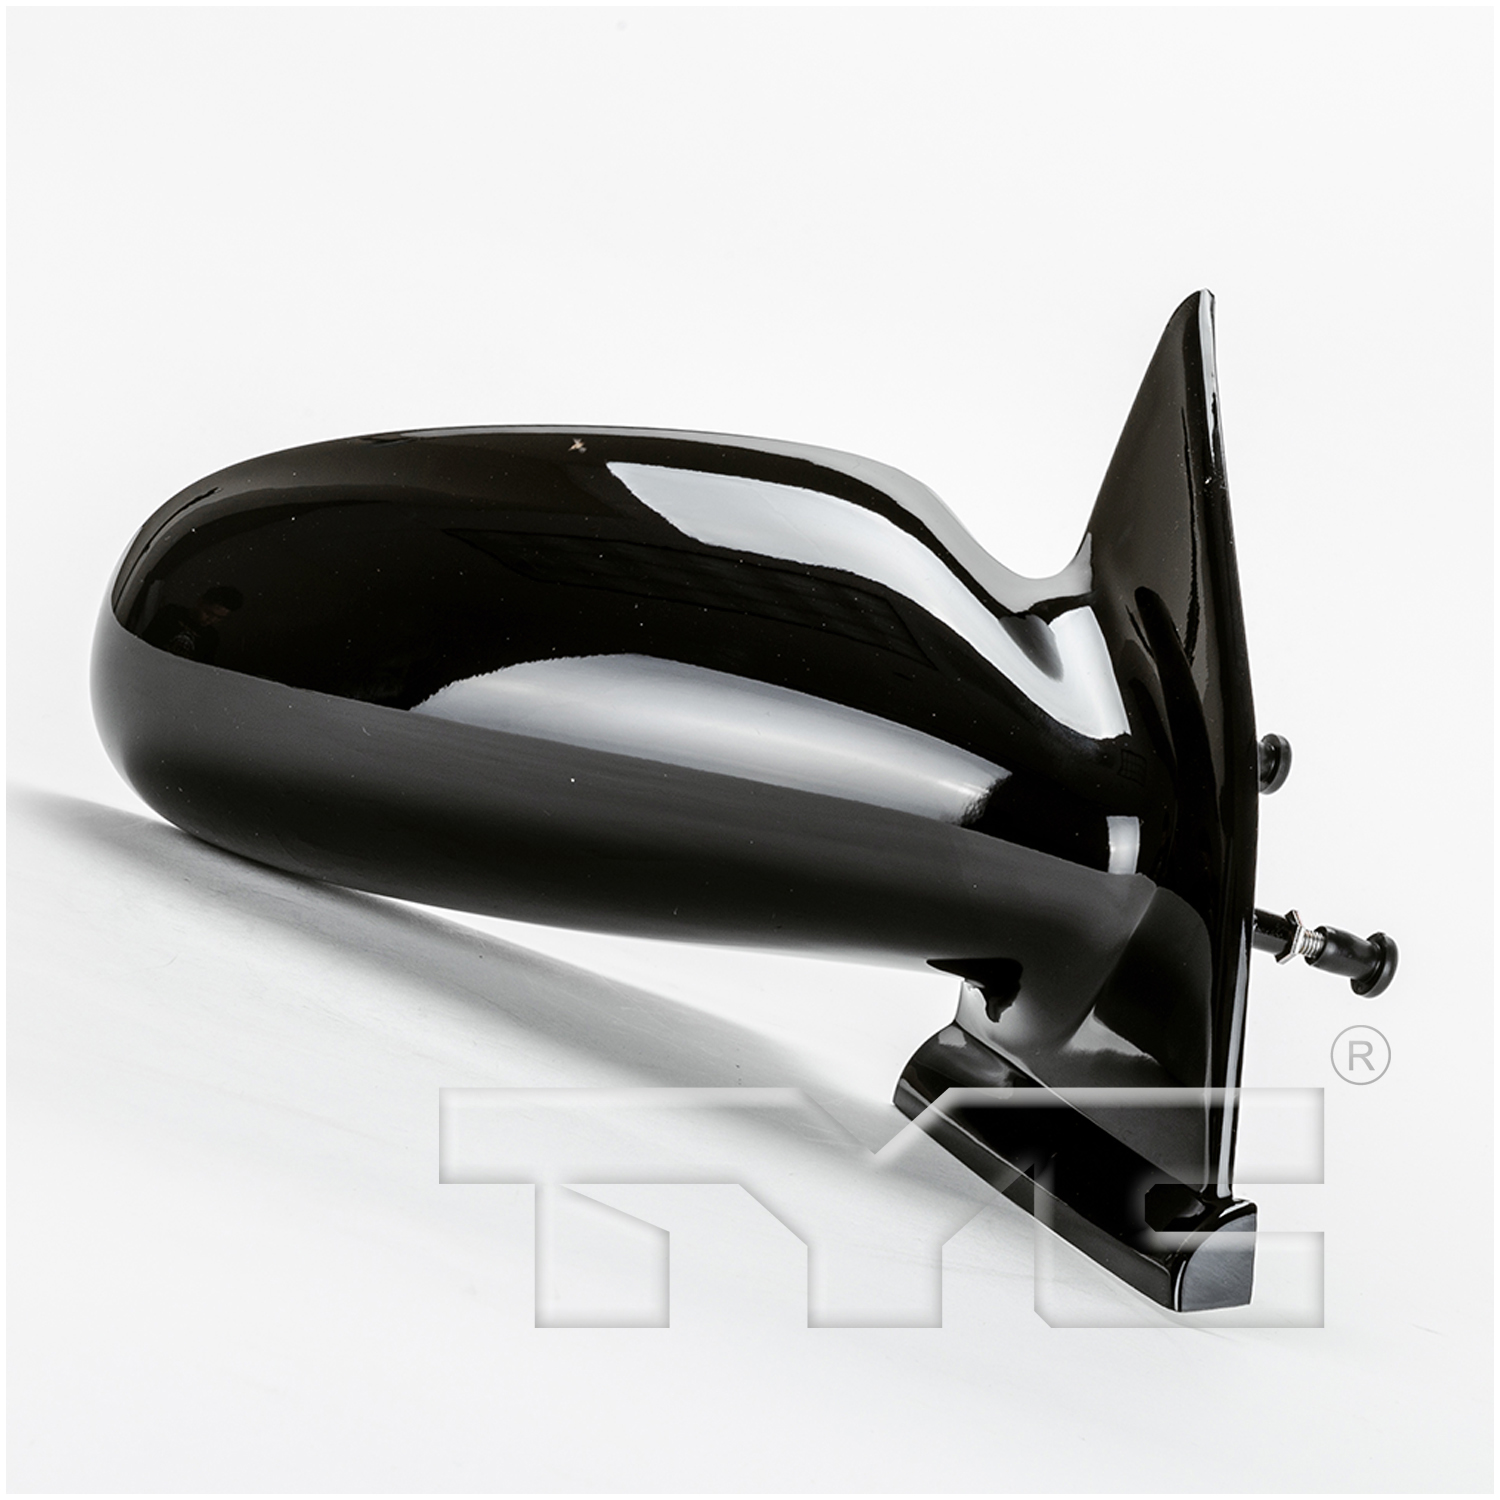 Aftermarket MIRRORS for SATURN - SL1, SL1,96-02,RT Mirror outside rear view